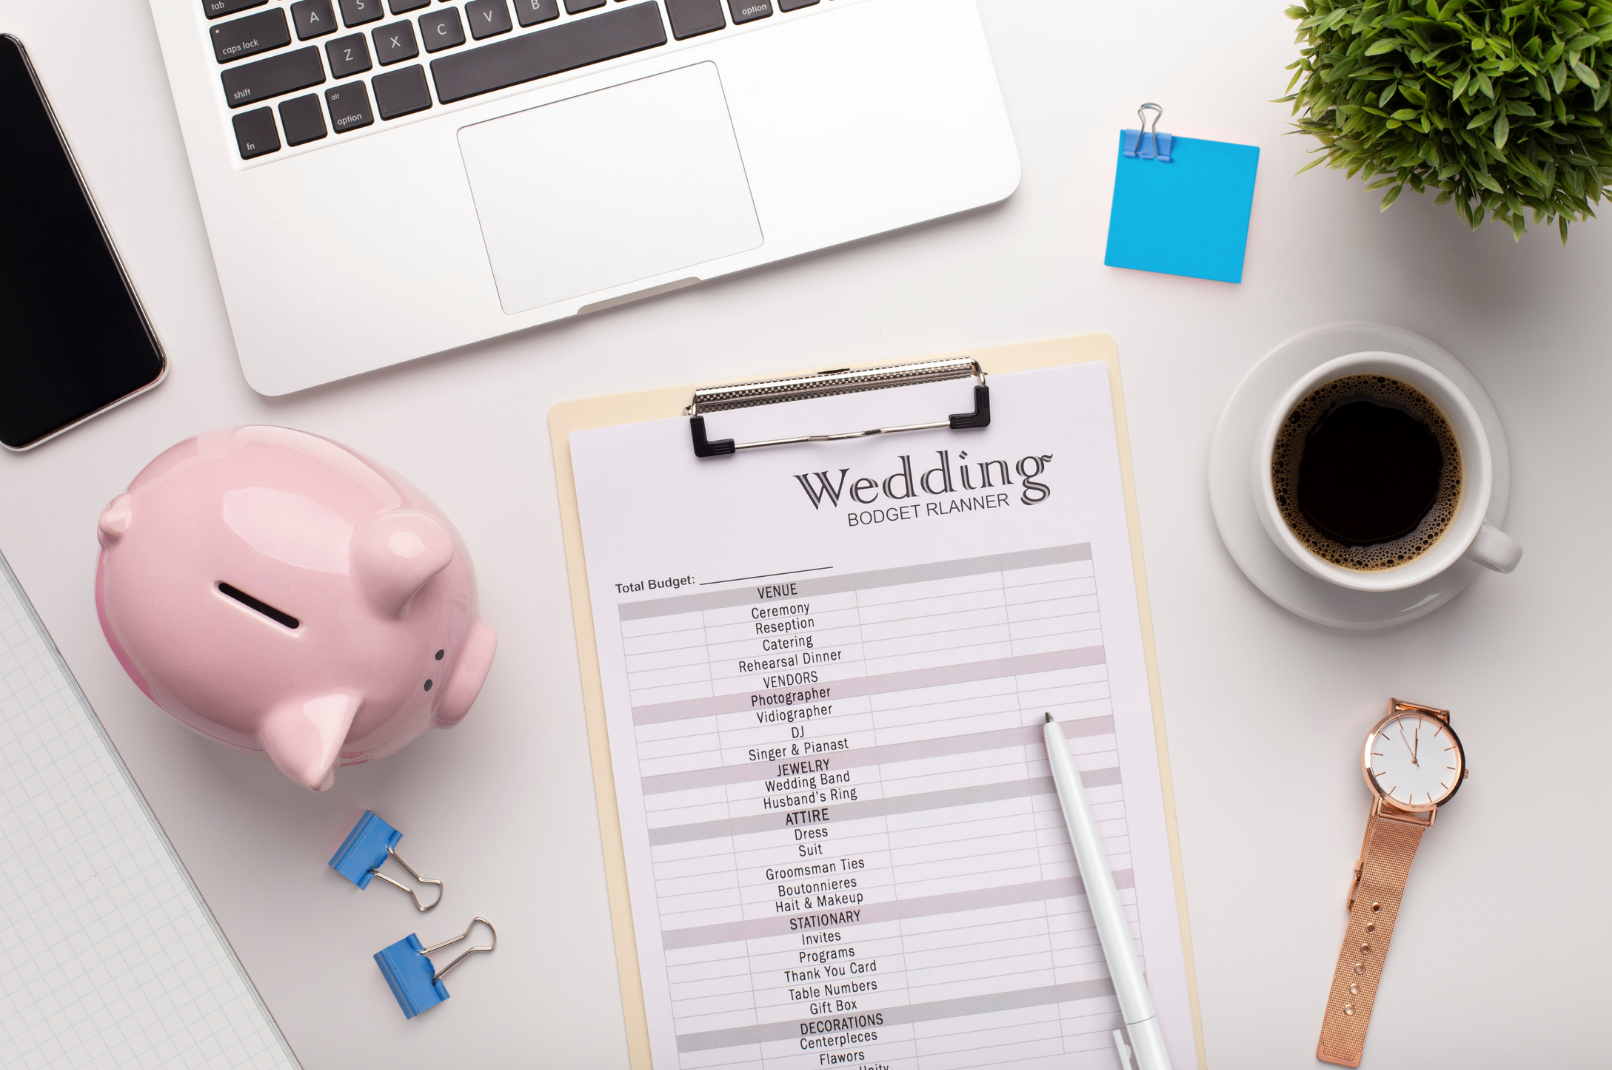 Say 'I Do' Without the Debt